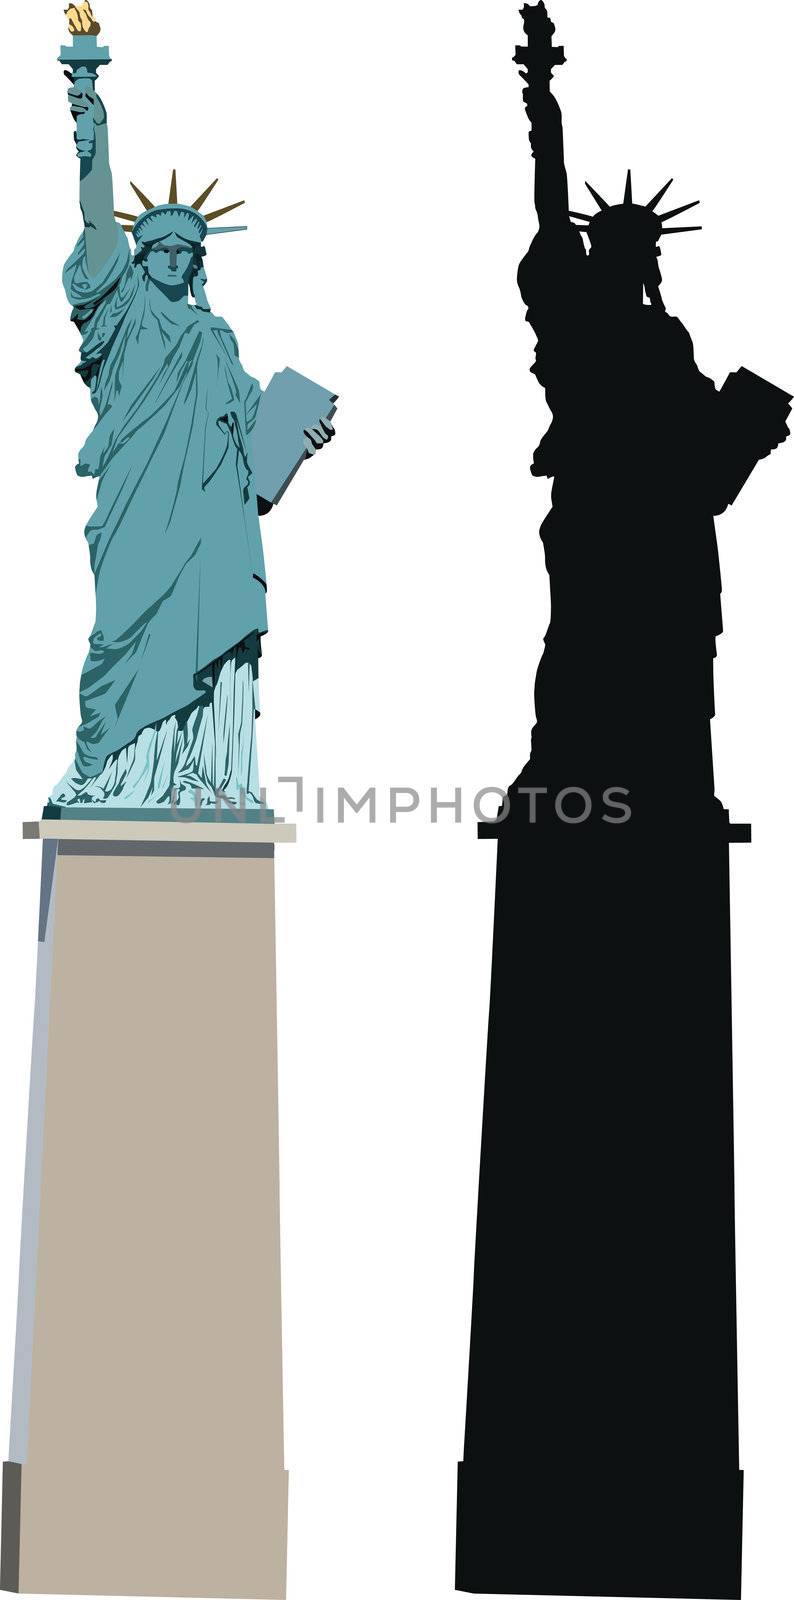 Illustration of Statue of Liberty in Paris smaller sister of famous New York statue